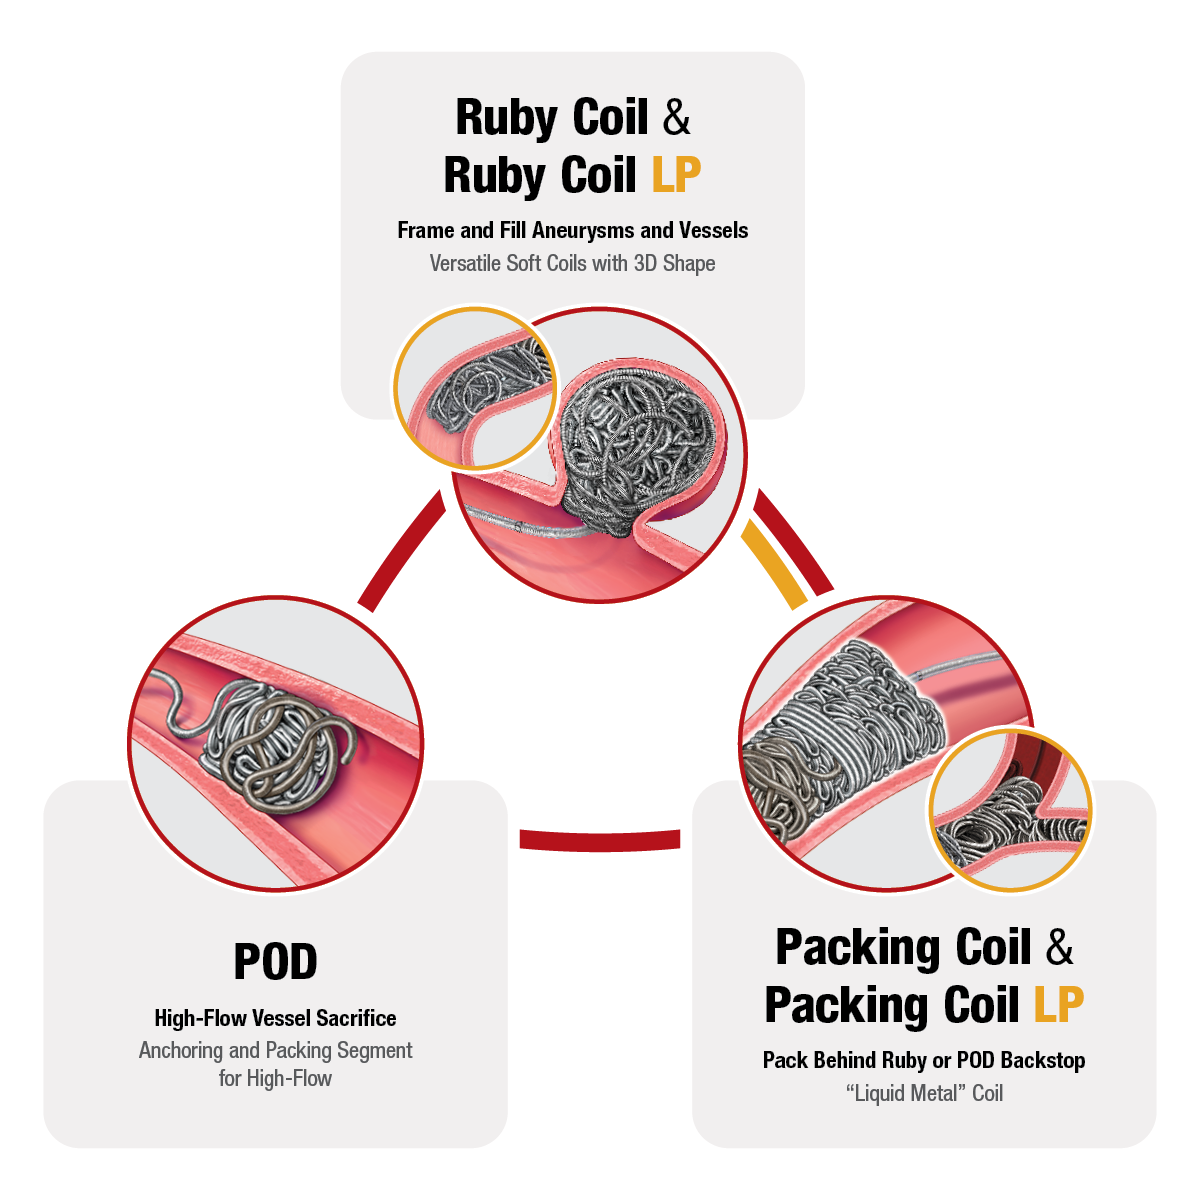 Graphic displaying Embolisation system products, uses, and sizes (dimensions below) in a triangle formation with text "Ruby Coil - Frame and Fill Aneurysms and Vessels - Versatile Soft Coils with 3D Shapes" , "POD - High-flow vessel sacrifice - Anchoring and Packing Segment for High-Flow" "Packing Coil - Pack Behind Ruby or POD Backstop - Liquid Metal Coil"